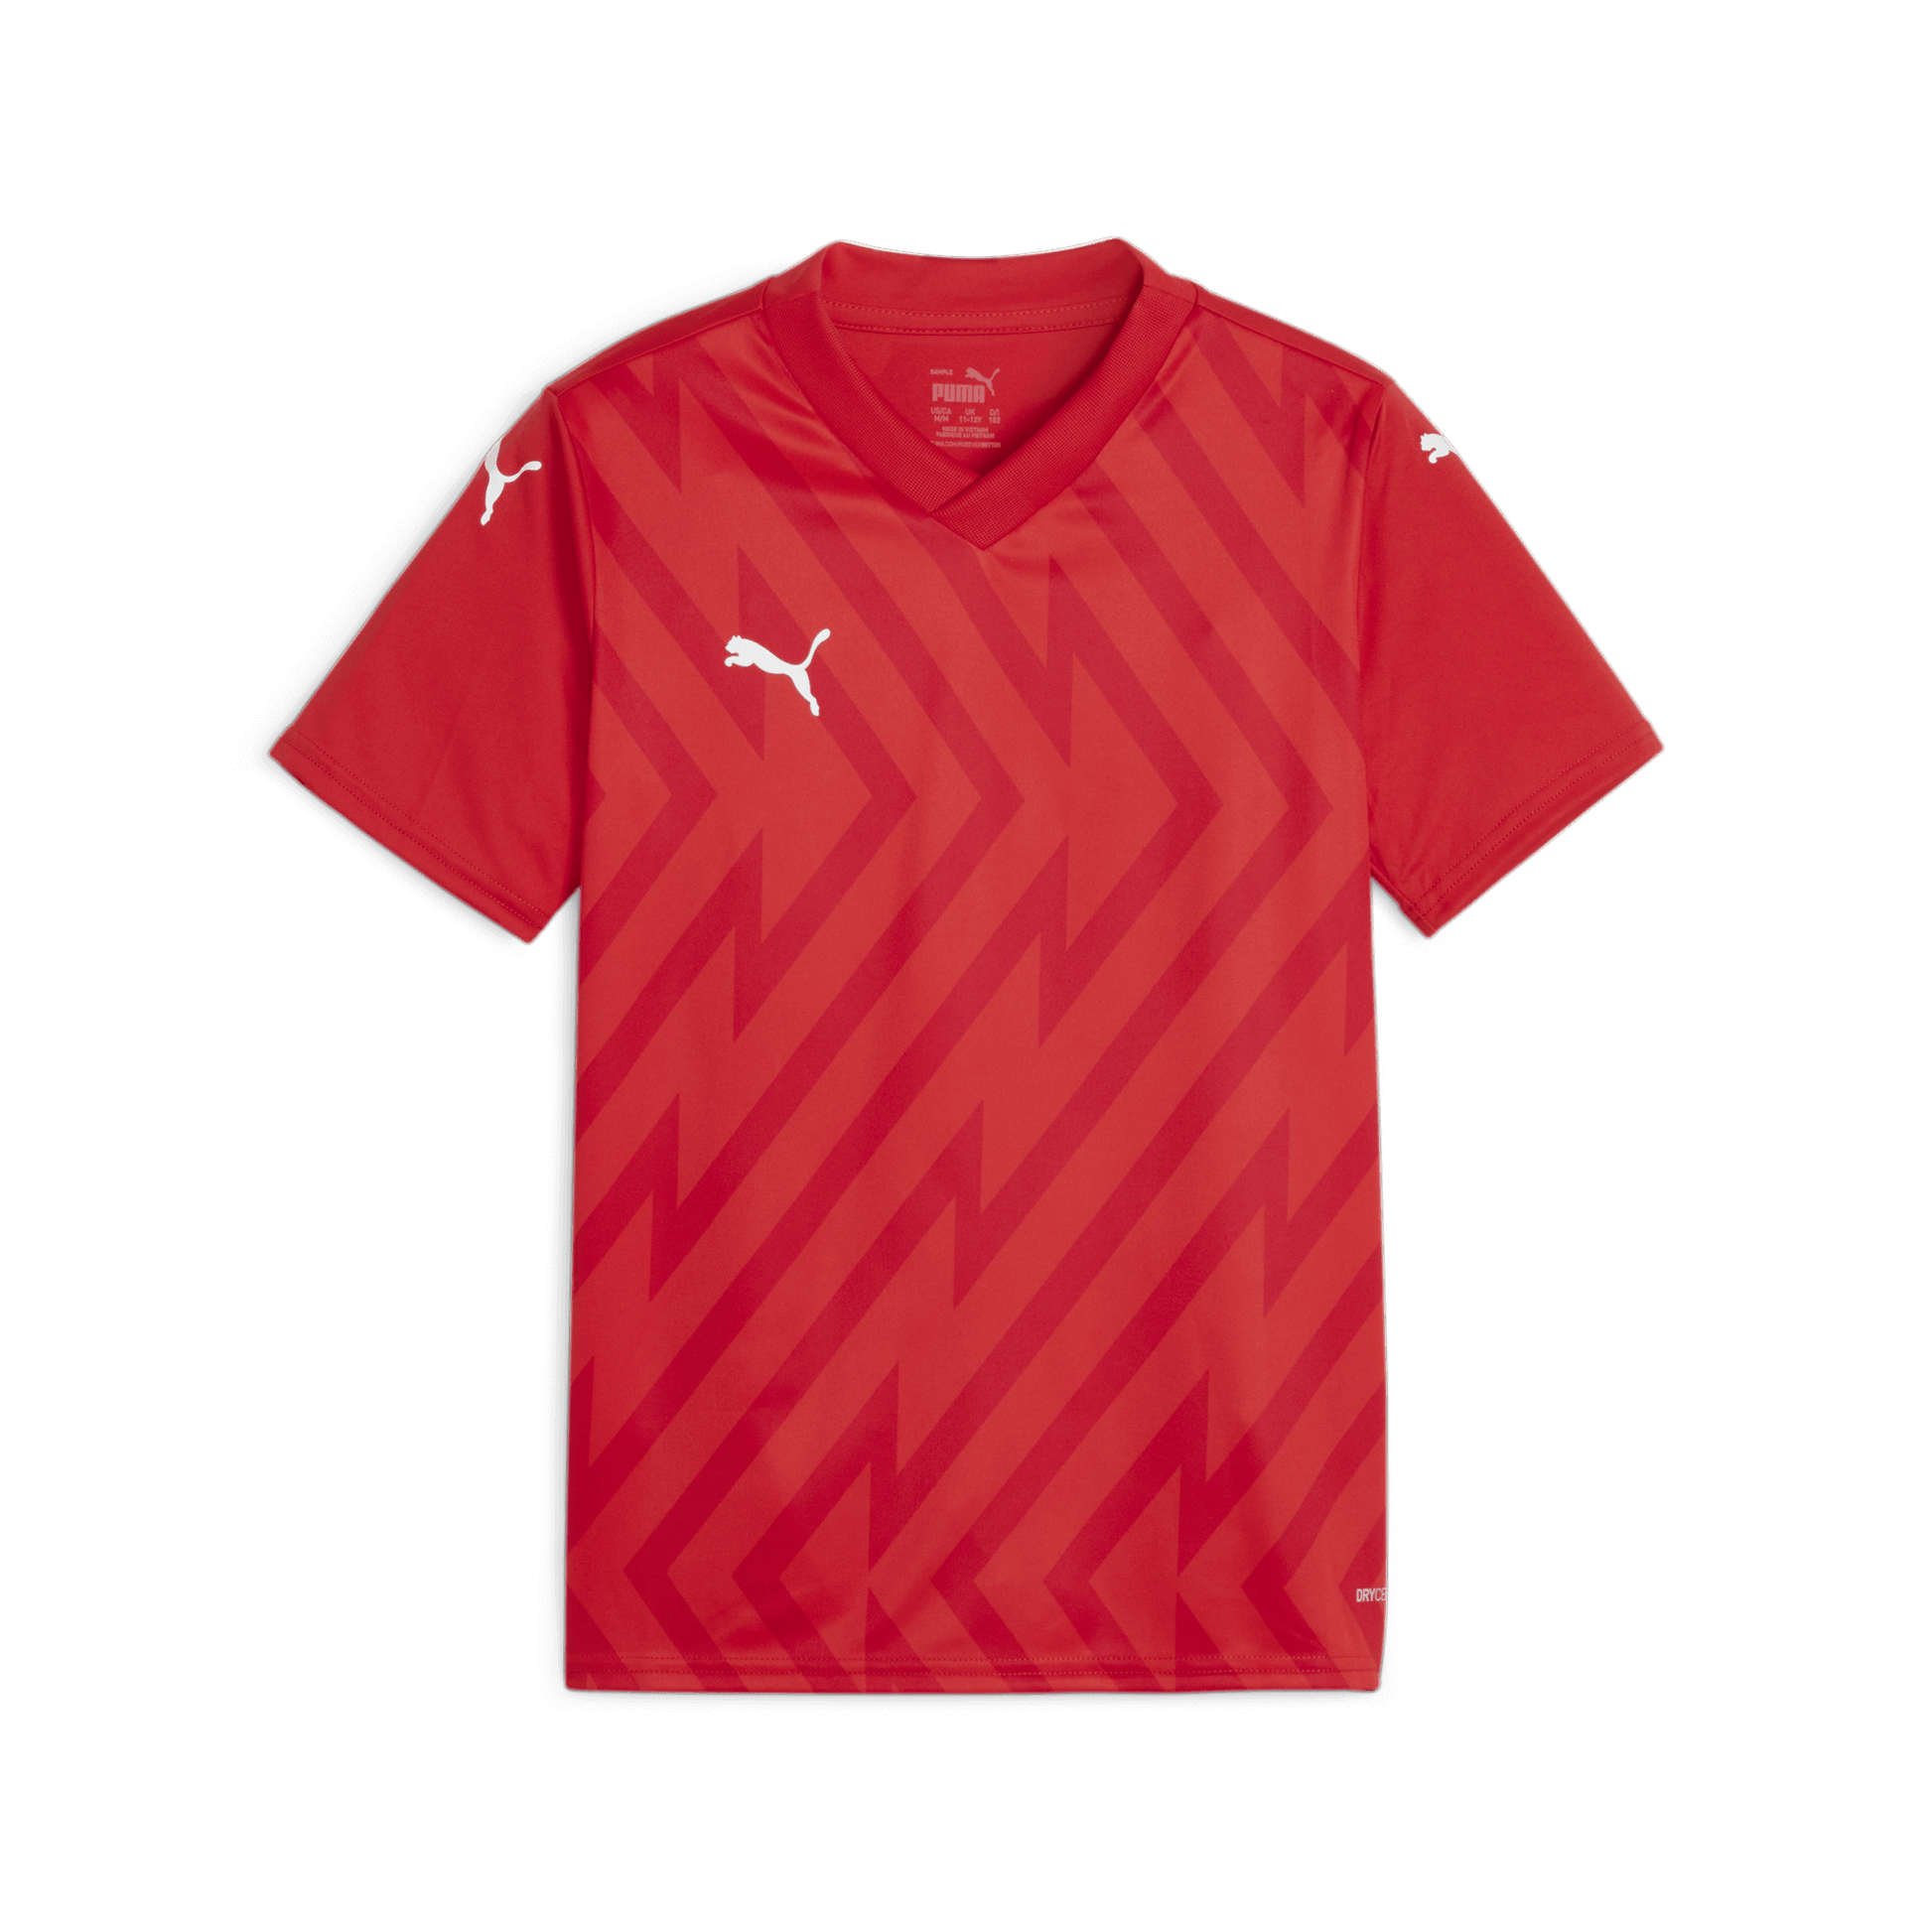 Puma YOUTH Team Glory 26 Jersey- Puma Red-Puma White-Strong Red (Front)